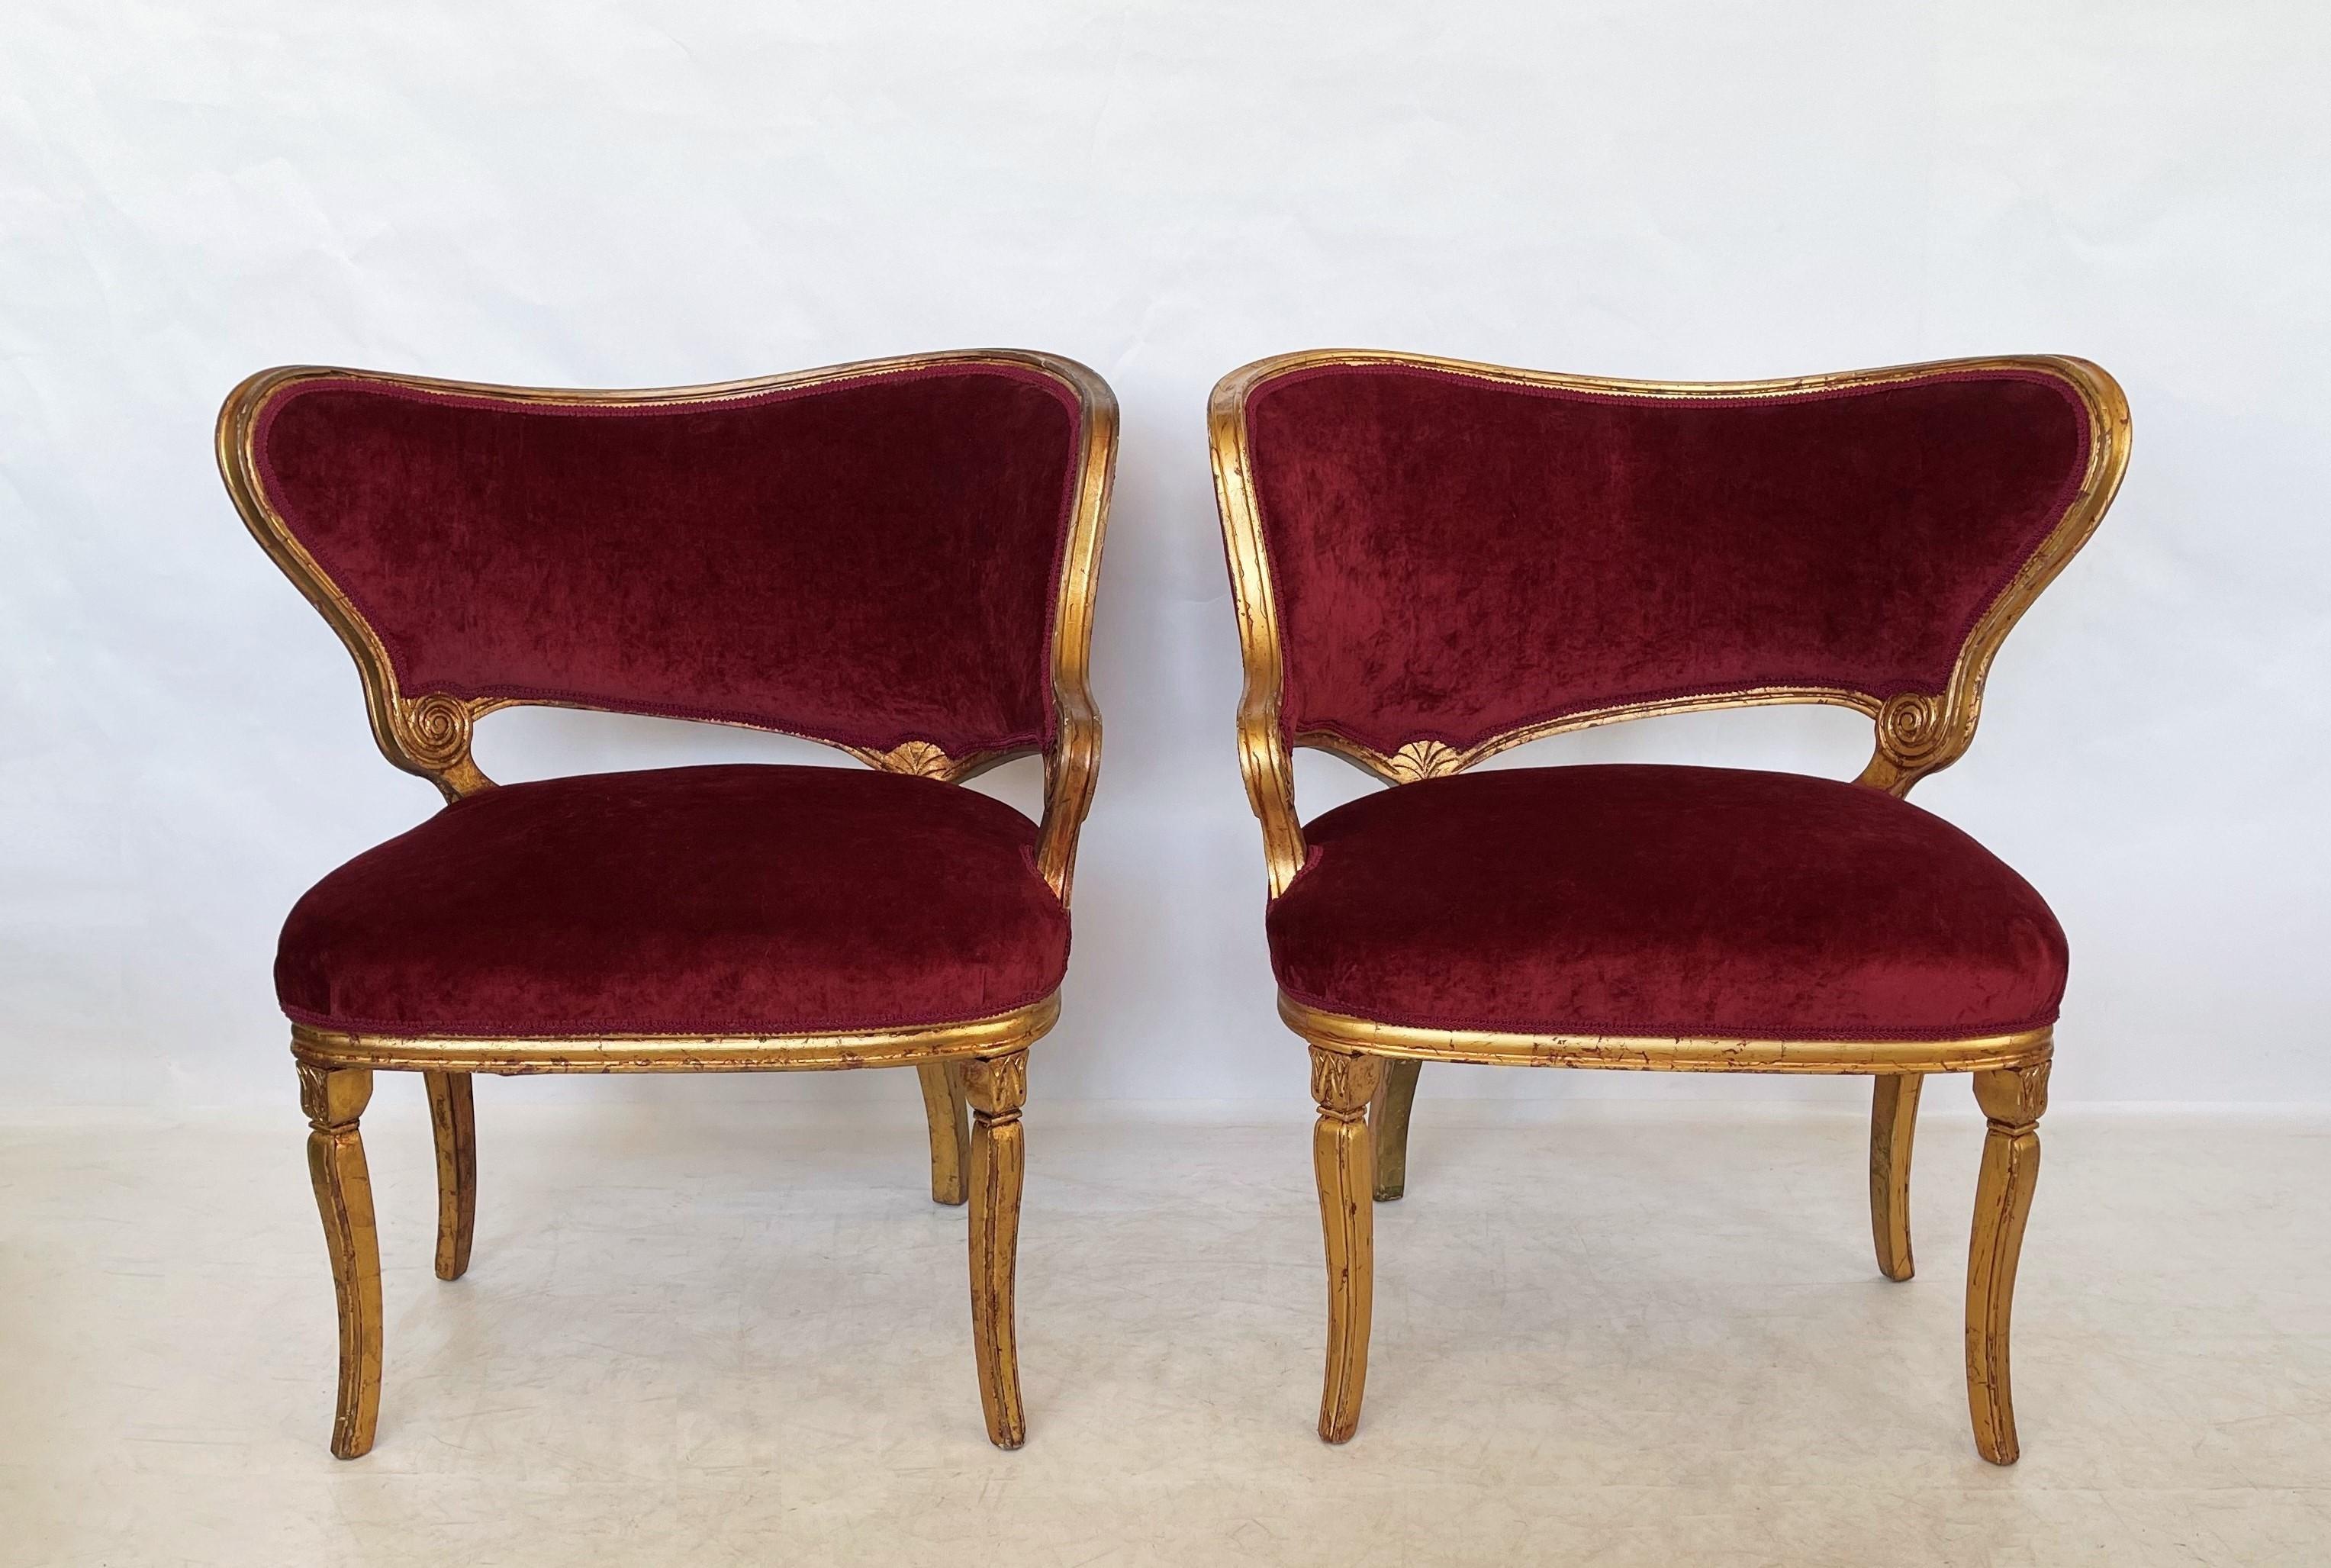 Pair of Hollywood Regency Fireside Chairs Attributed to Grosfeld House In Good Condition For Sale In Dallas, TX